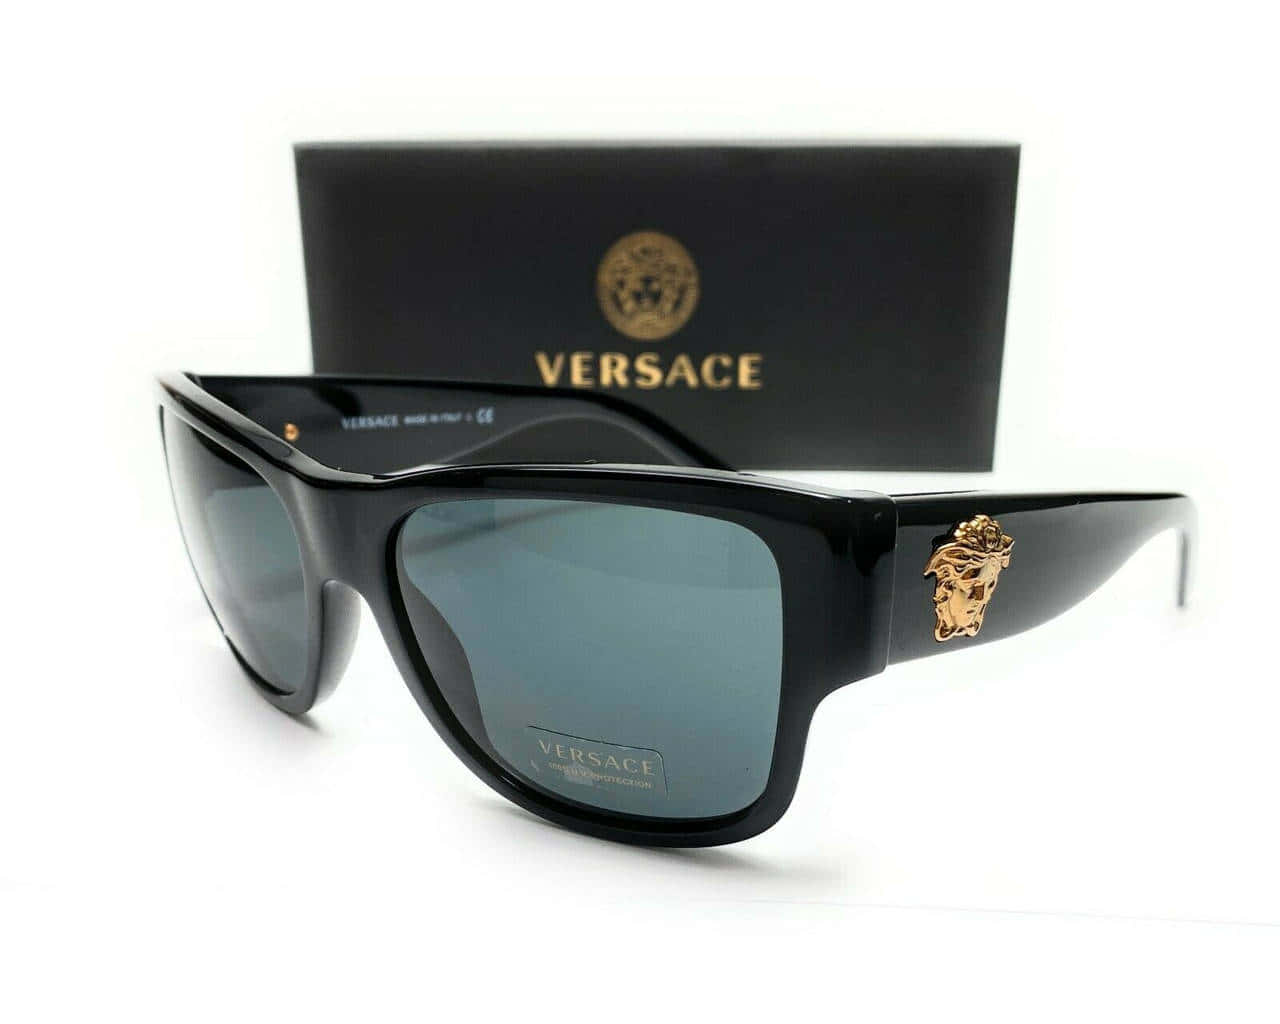 Embrace luxury with the Versace lifestyle